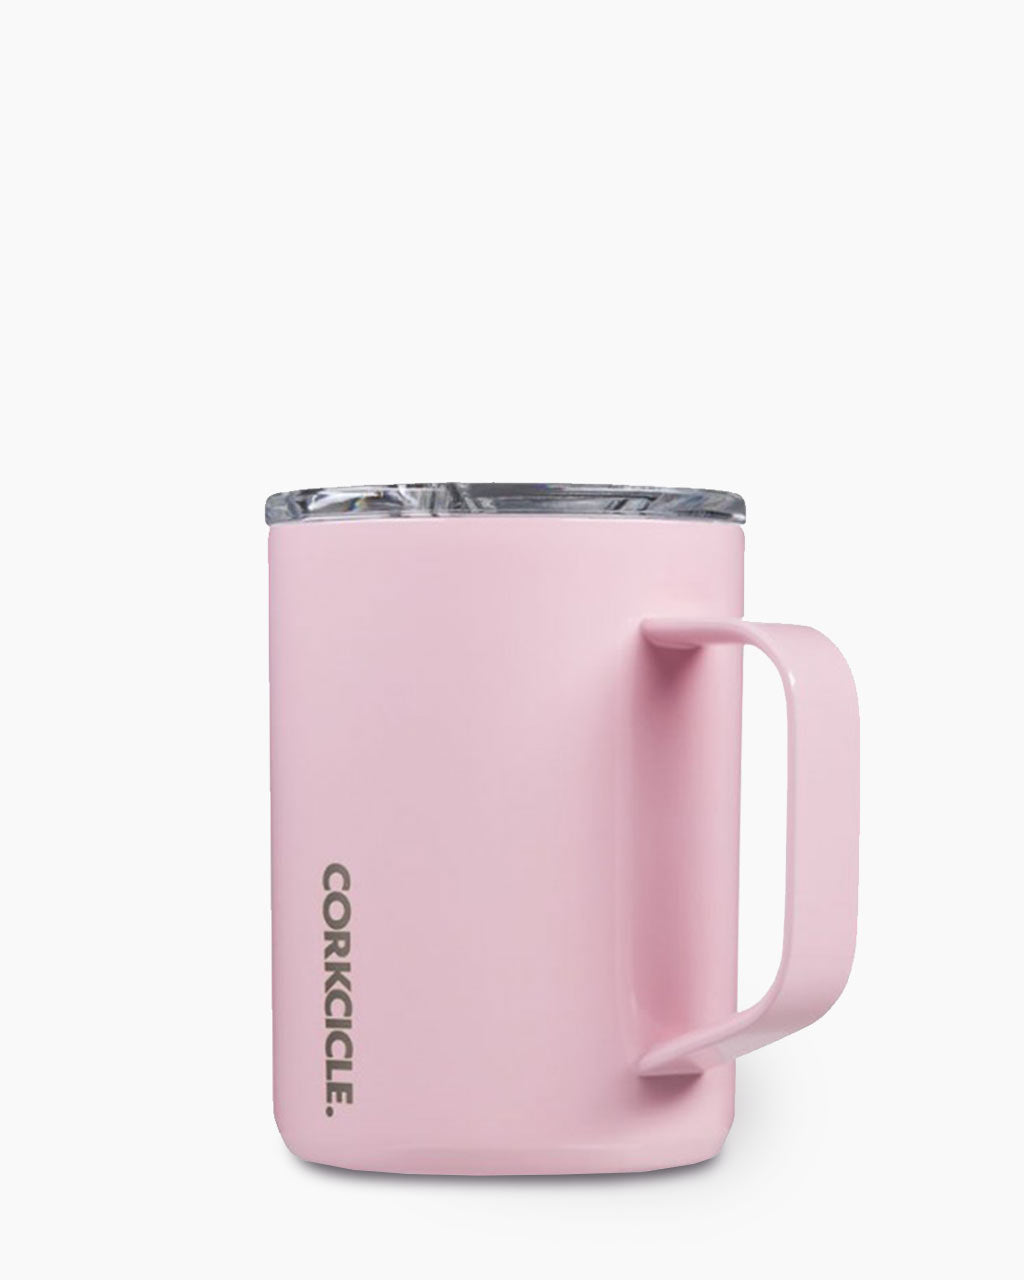 16 oz Coffee Mug in White Rose from Corkcicle, Insulated Travel Mug